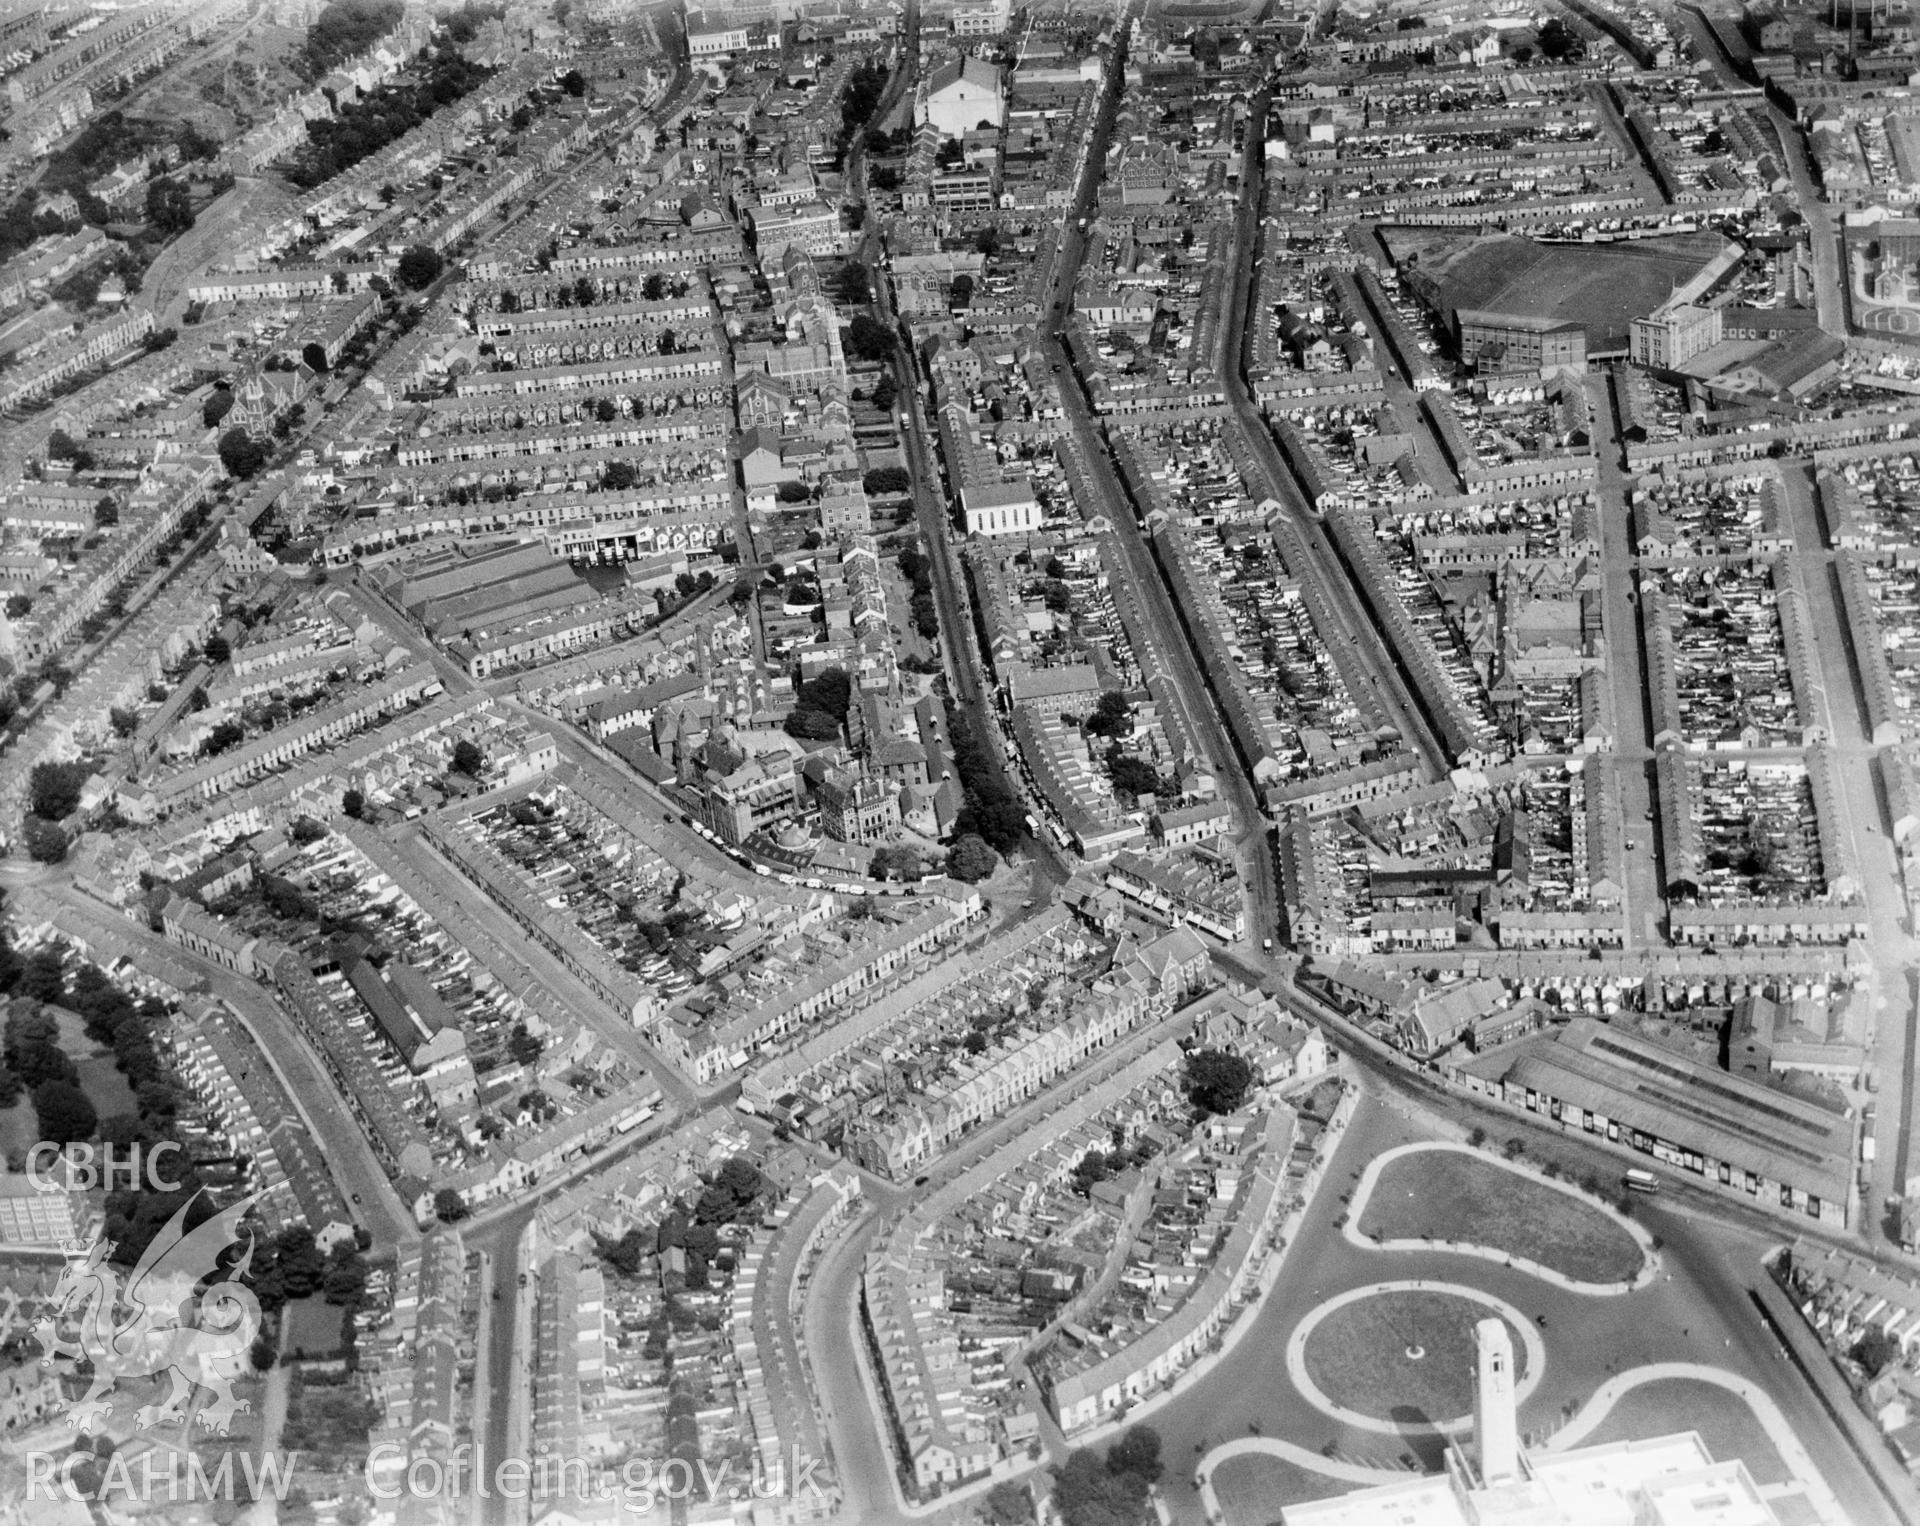 View of central Swansea showing the Hospital and Vetch Field, oblique aerial view. 5?x4? black and white glass plate negative.